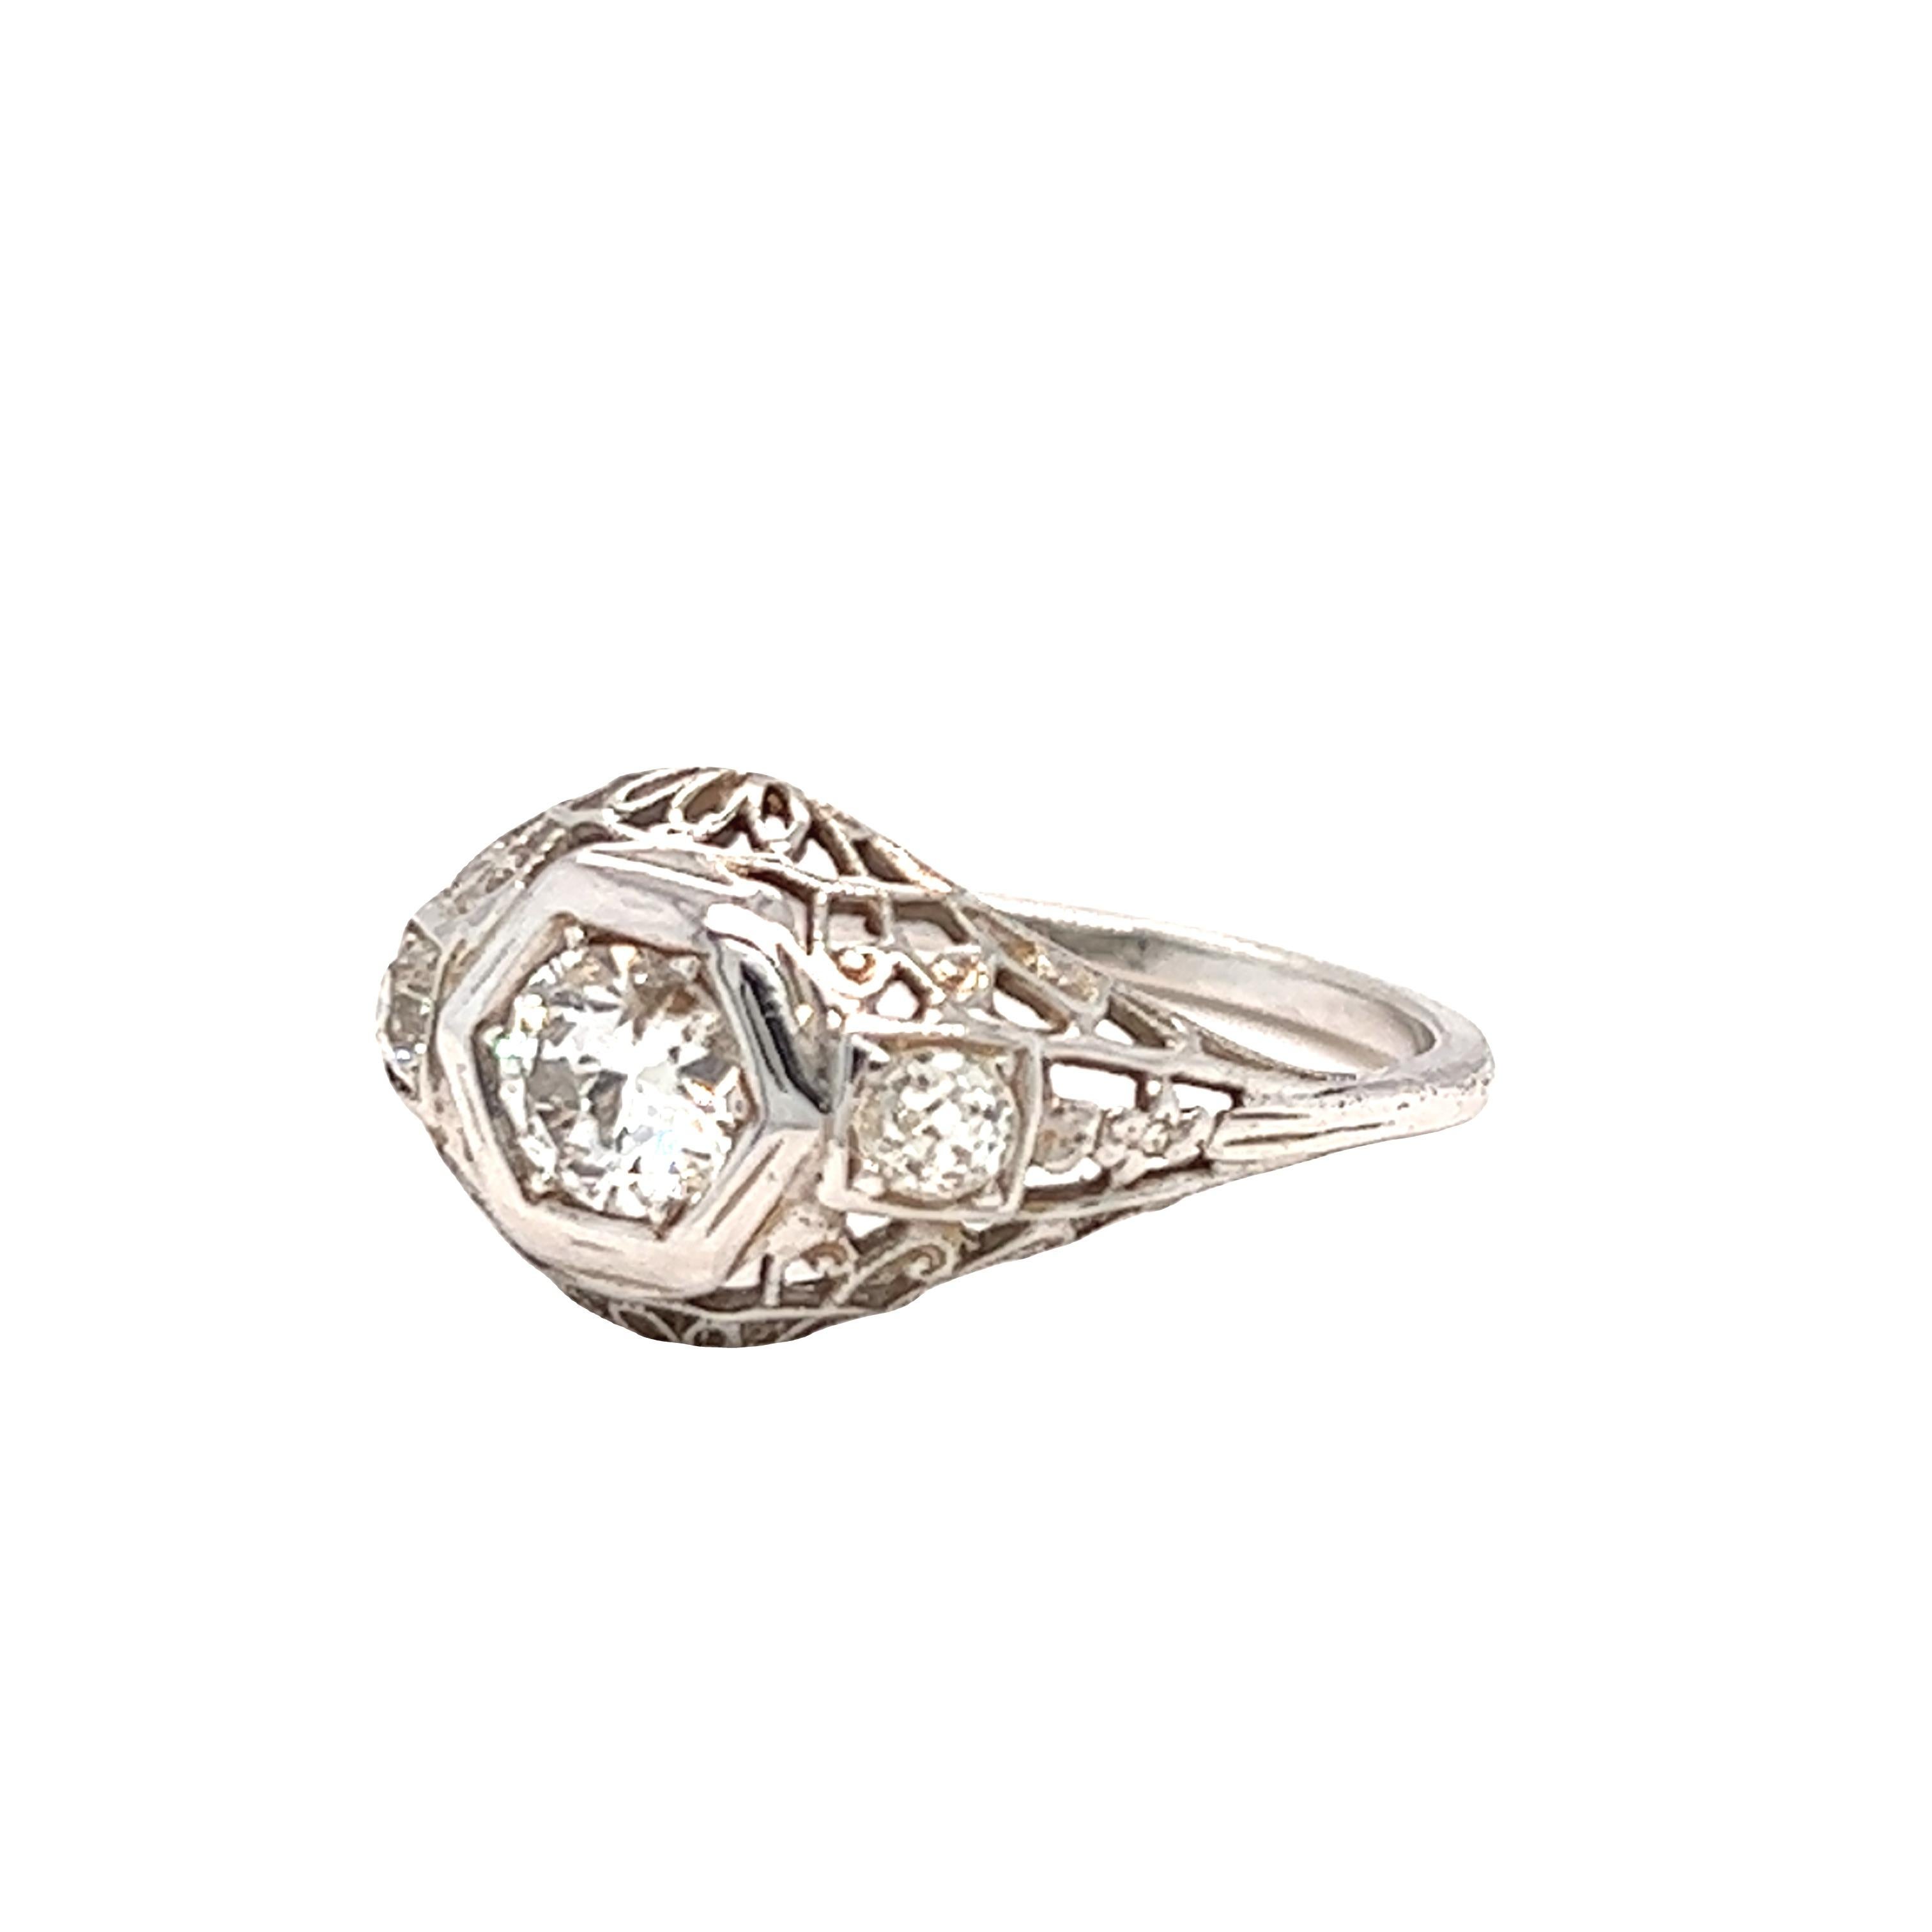 Centering in this beautiful Edwardian era ring is an Old European cut diamond weighing approximately 0.75 carat H color and SI clarity. The side diamonds accent the center stone collectively weigh 0.15 carat. The ring is crafted in 14k white gold